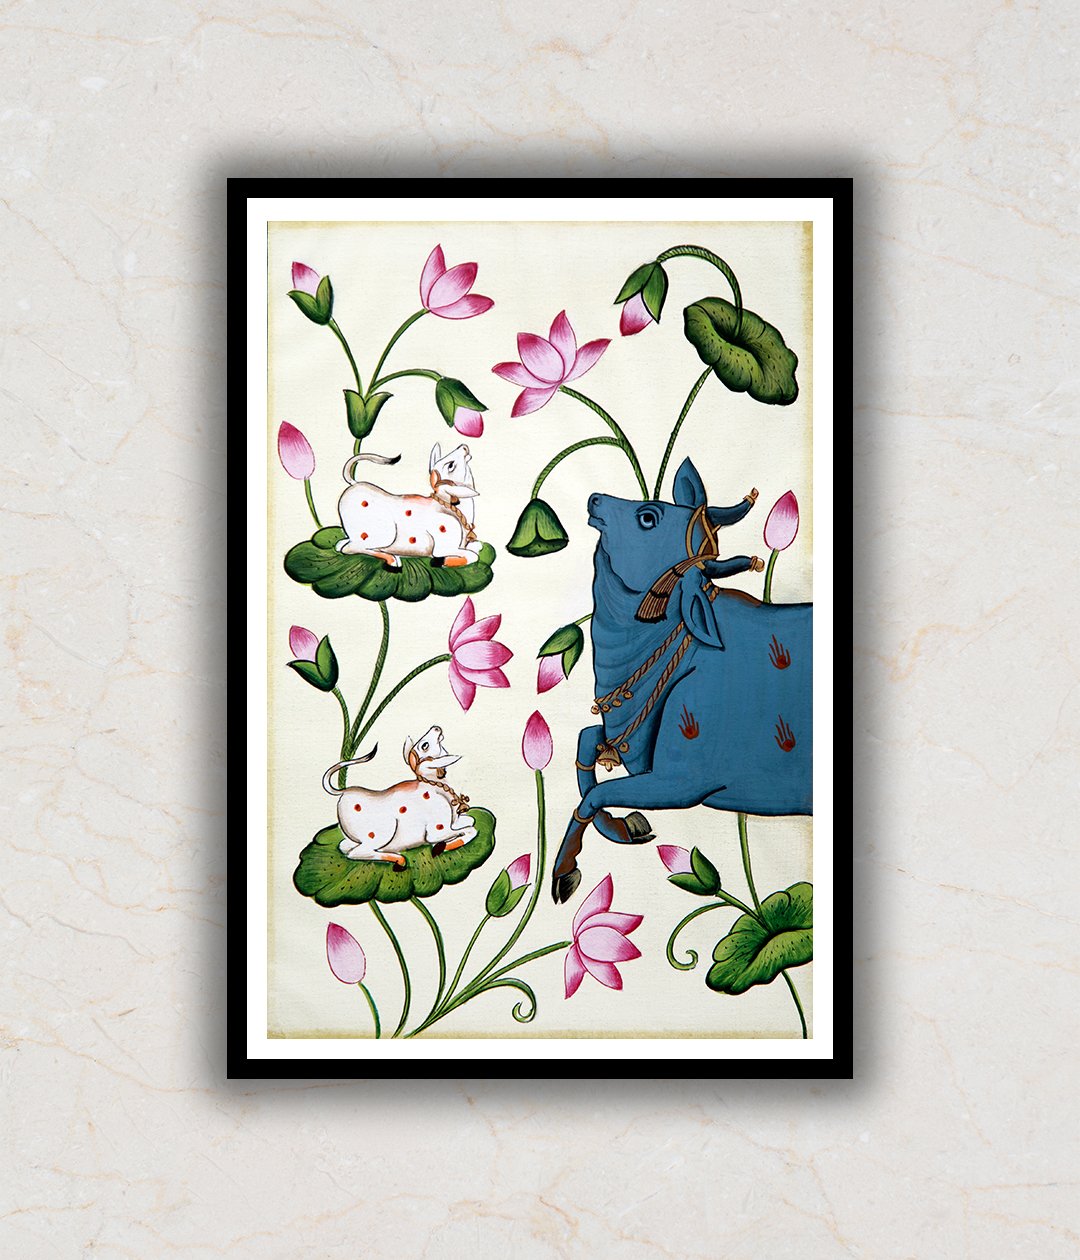 Cow and Lotus Pichwai Art Painting For Home Wall Art Decor 2